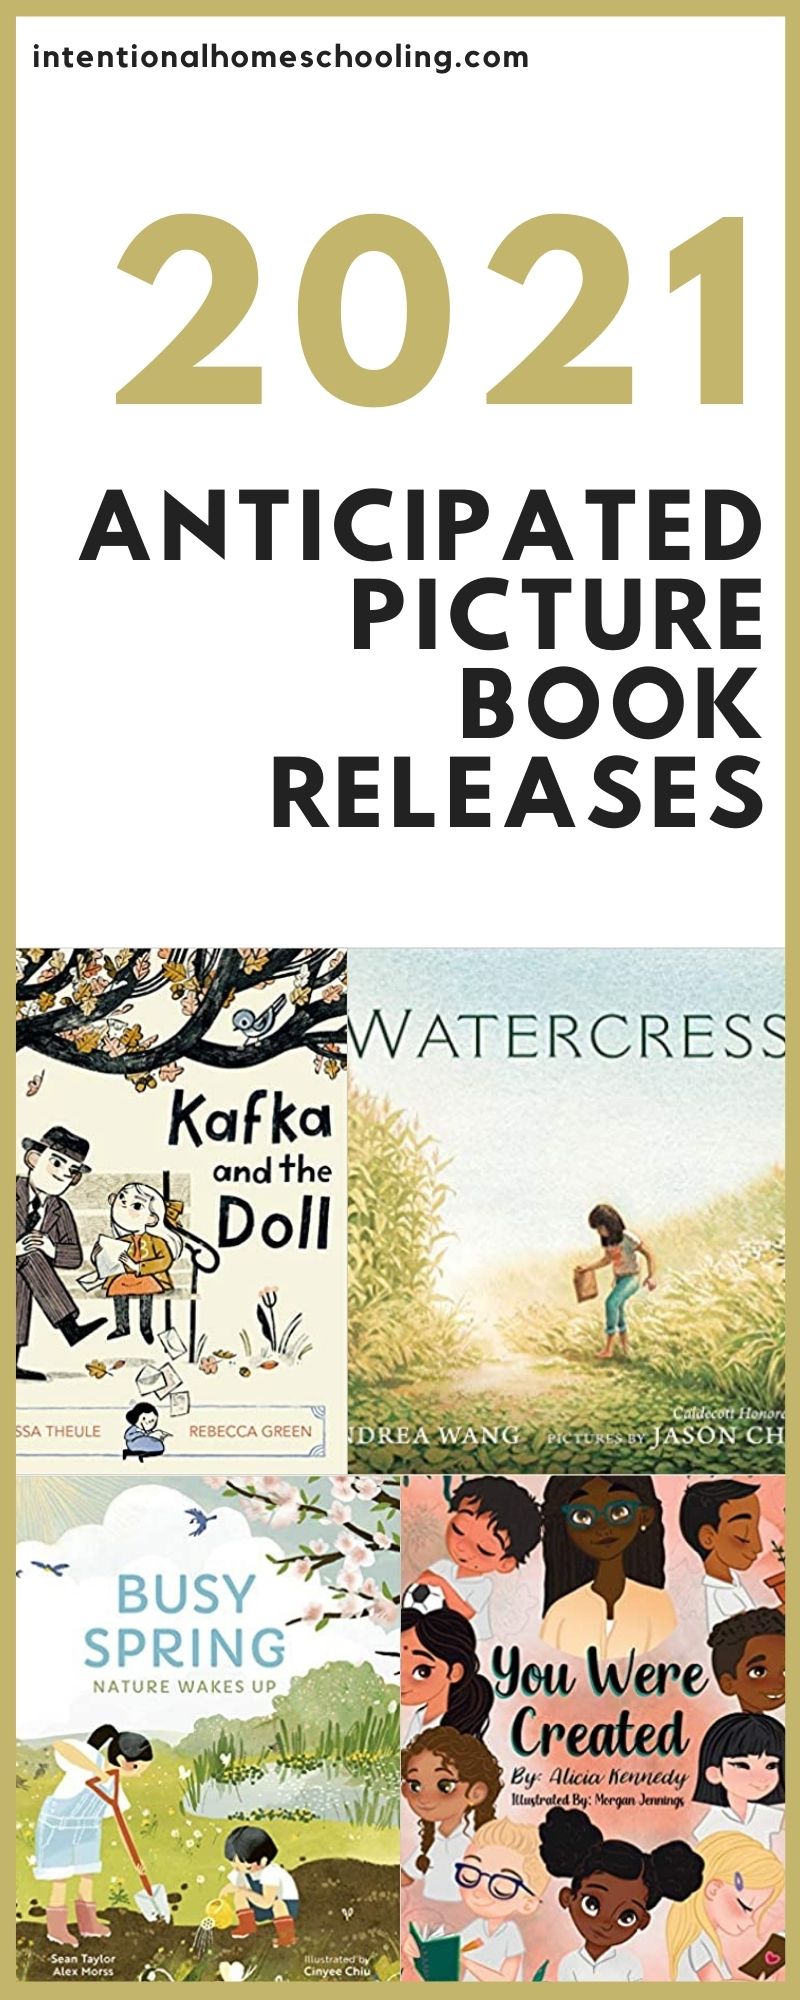 New Picture Books Released March 2021 - great new picture book releases